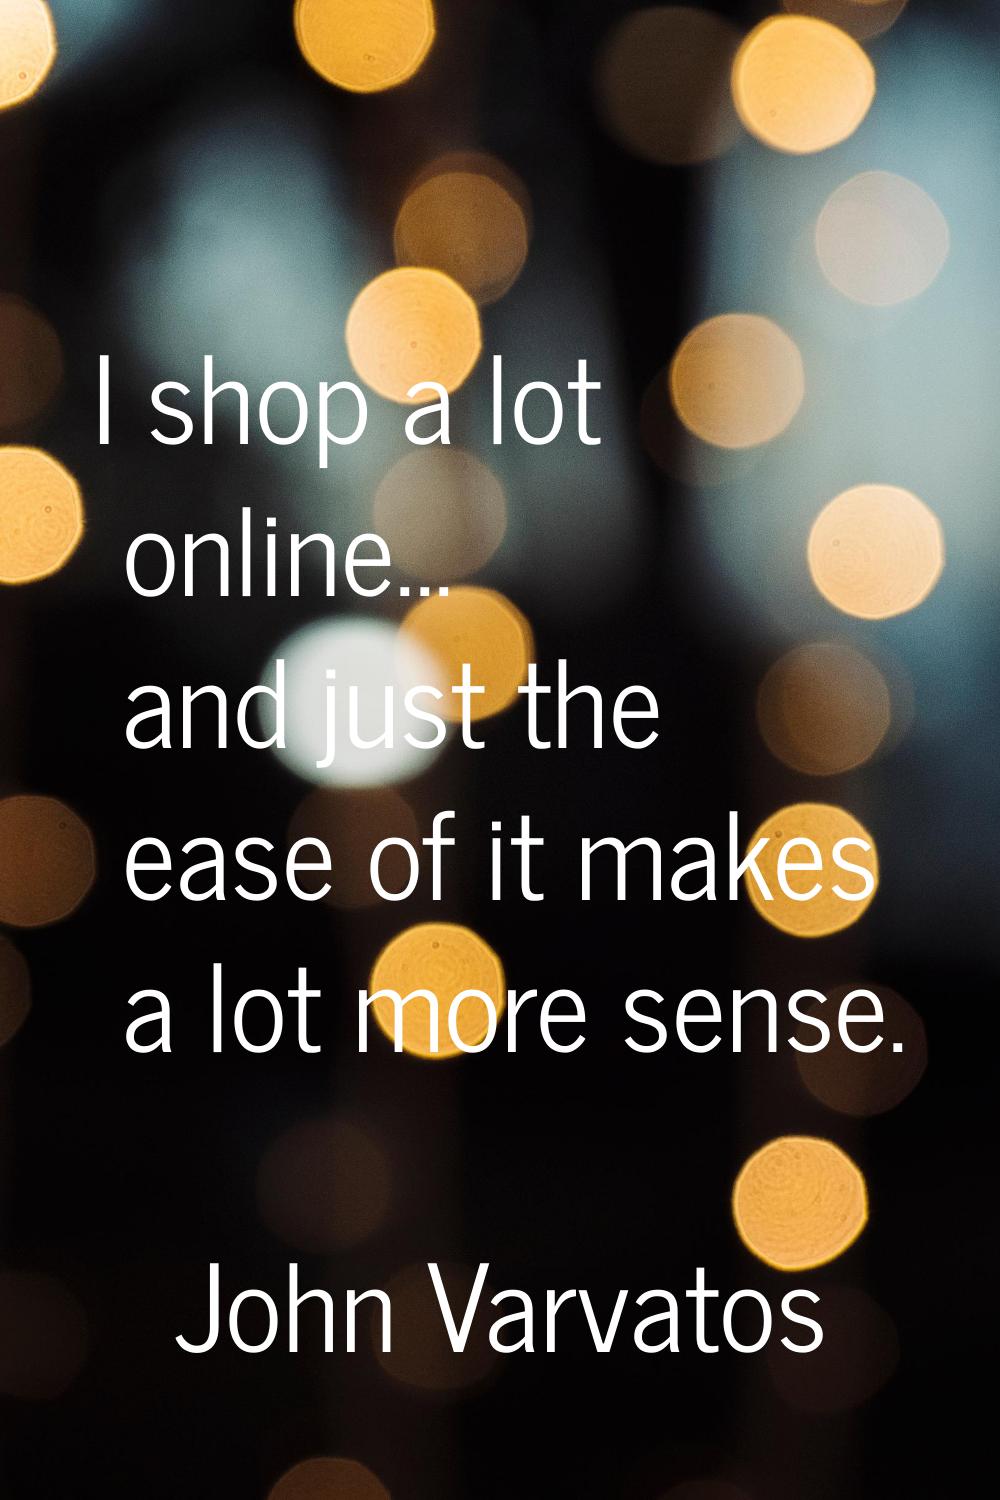 I shop a lot online... and just the ease of it makes a lot more sense.